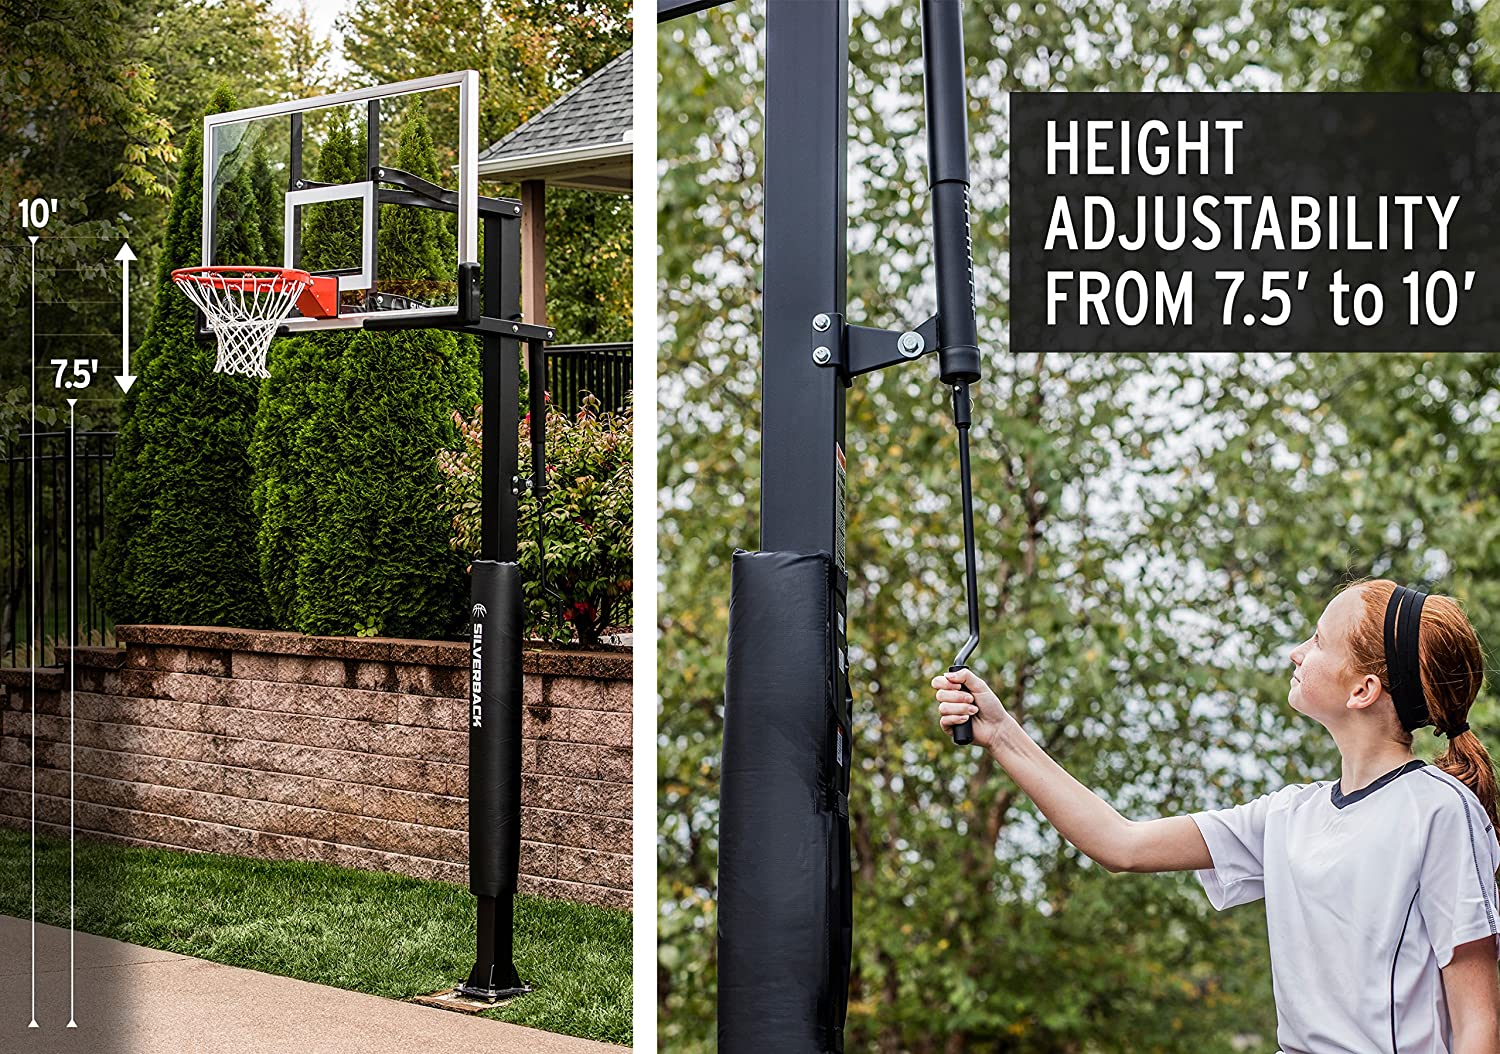 Silverback 54" and 60" In-Ground Basketball Systems with Adjustable-Height - $600